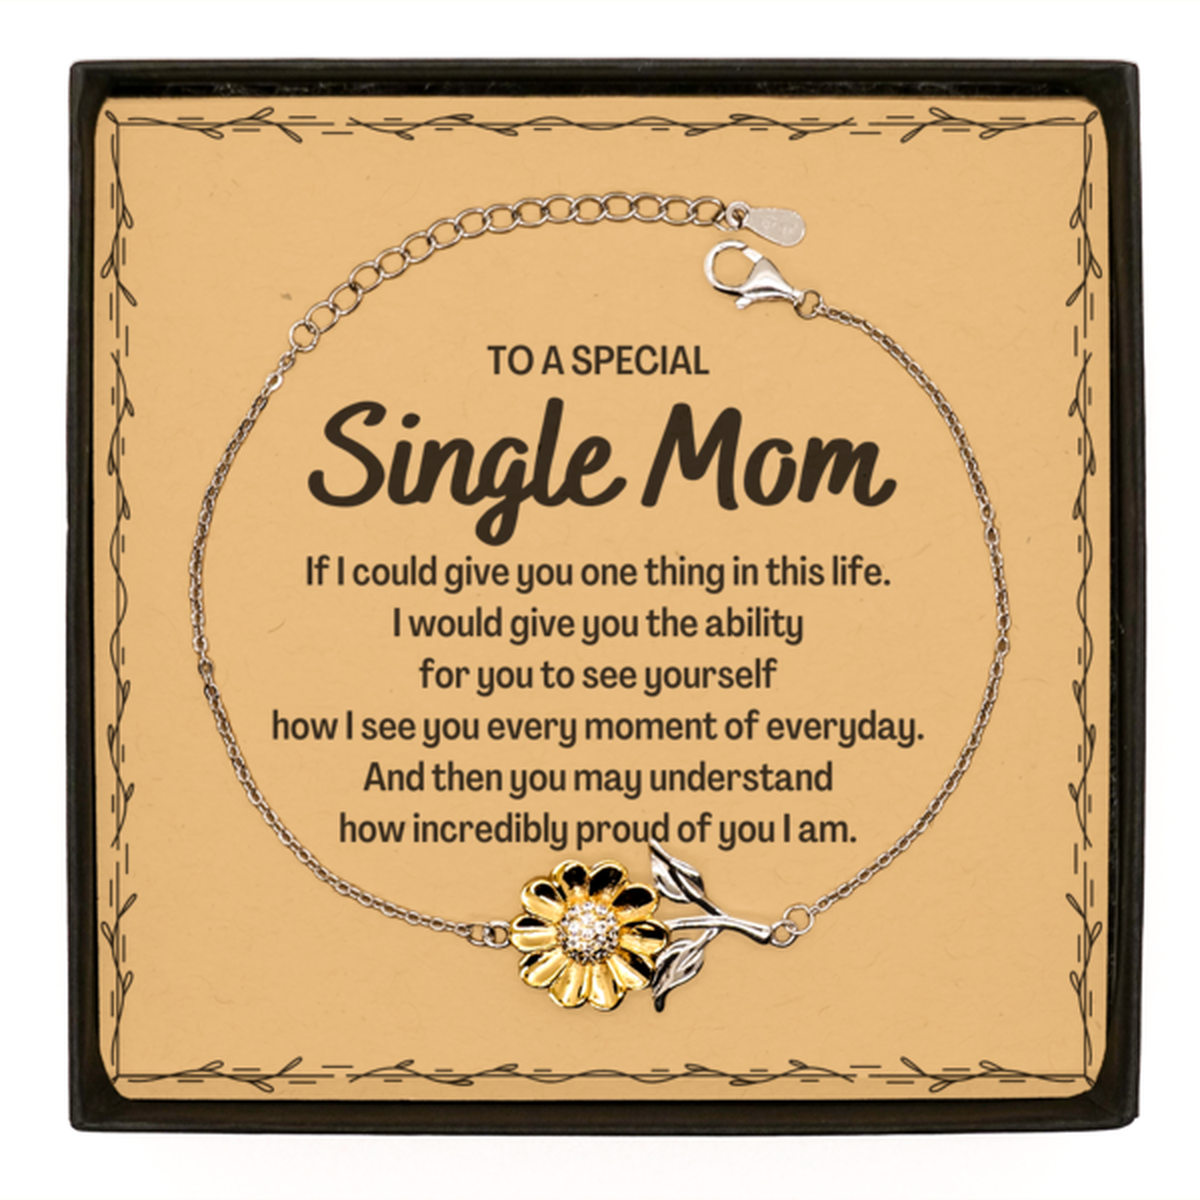 To My Single Mom Sunflower Bracelet, Gifts For Single Mom Message Card, Inspirational Gifts for Christmas Birthday, Epic Gifts for Single Mom To A Special Single Mom how incredibly proud of you I am